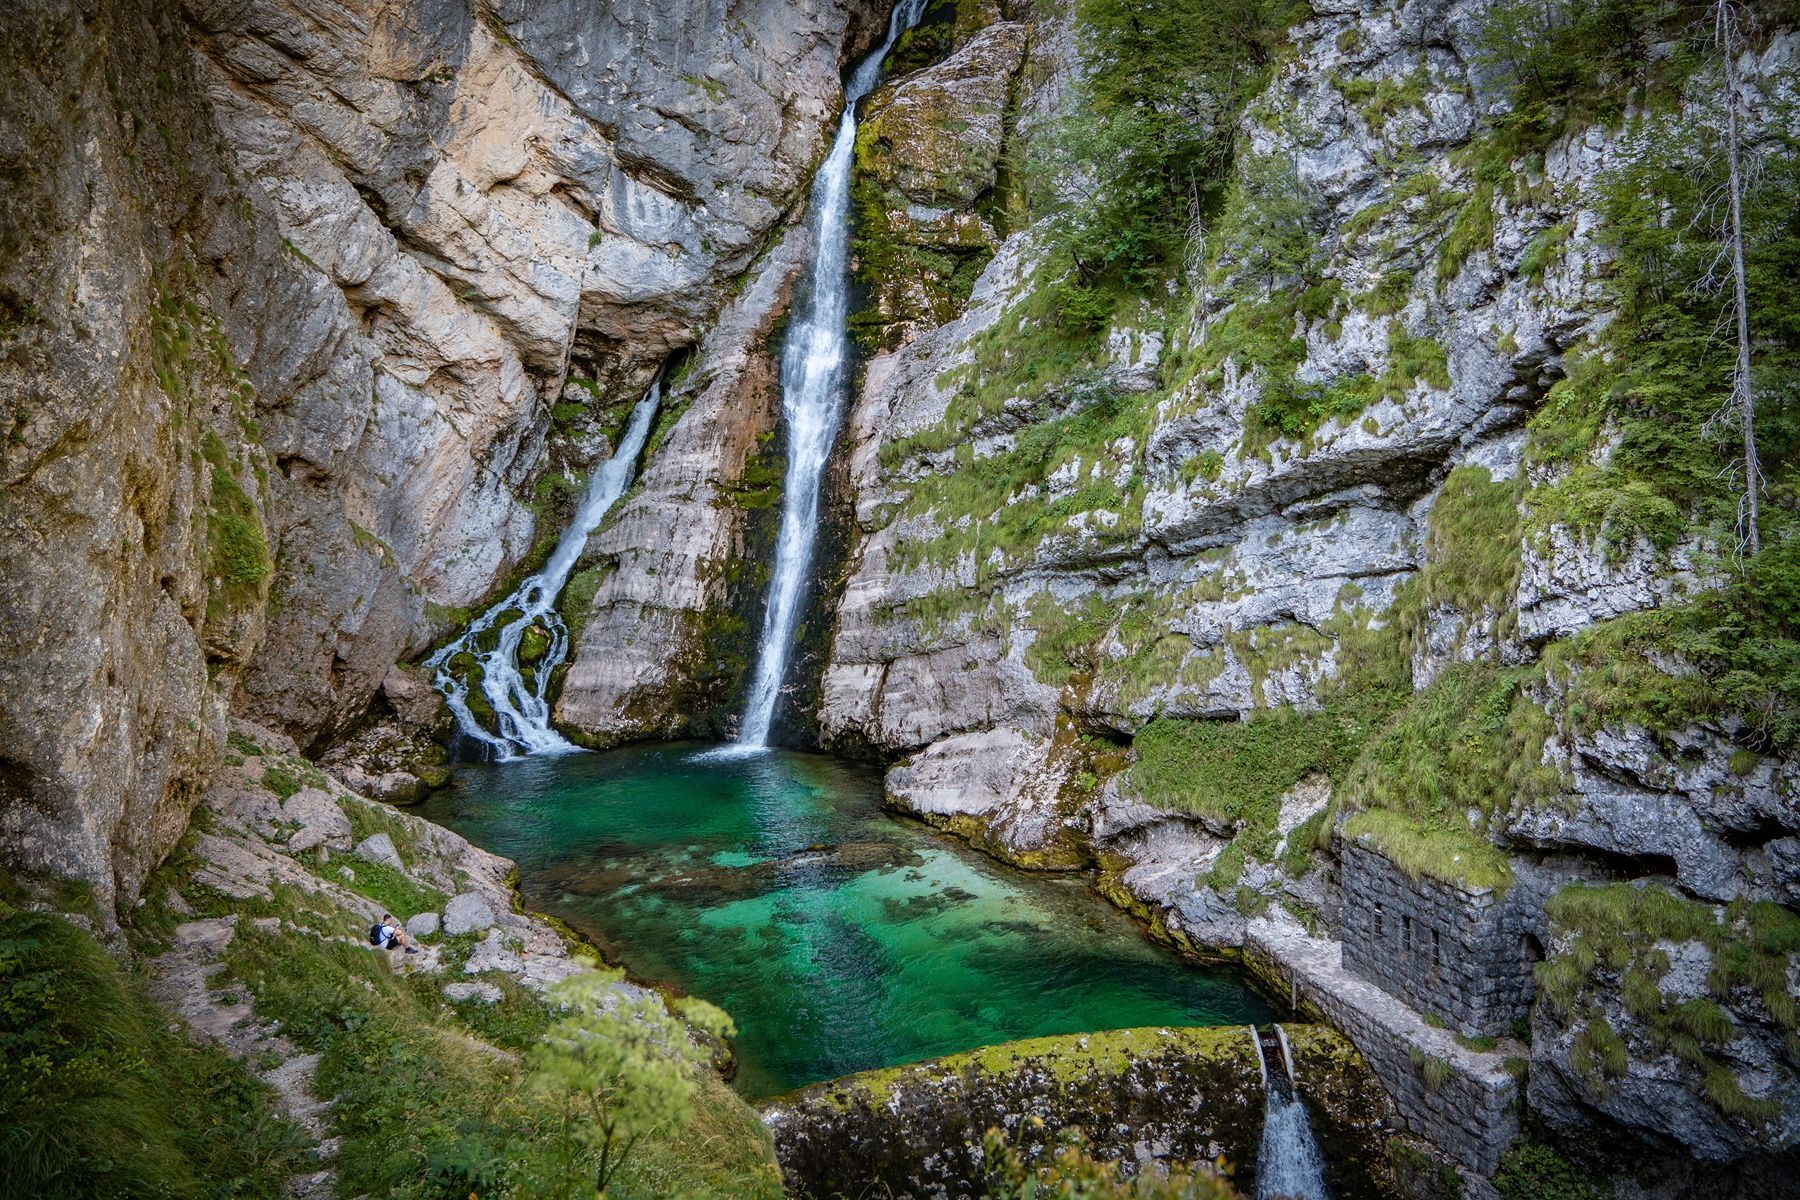 <p>If you’re planning a getaway to the Lake Bohinj region, be sure to add a trip to the <a href="https://tdbohinj.si/en/savica-waterfall/">Savica waterfall</a> to your itinerary. This majestic, double-cascade waterfall is almost 80 metres (262 feet) tall, making it one of the highest in Slovenia. When the melting snow feeds its waters in spring, it gives visitors a truly striking show.</p>